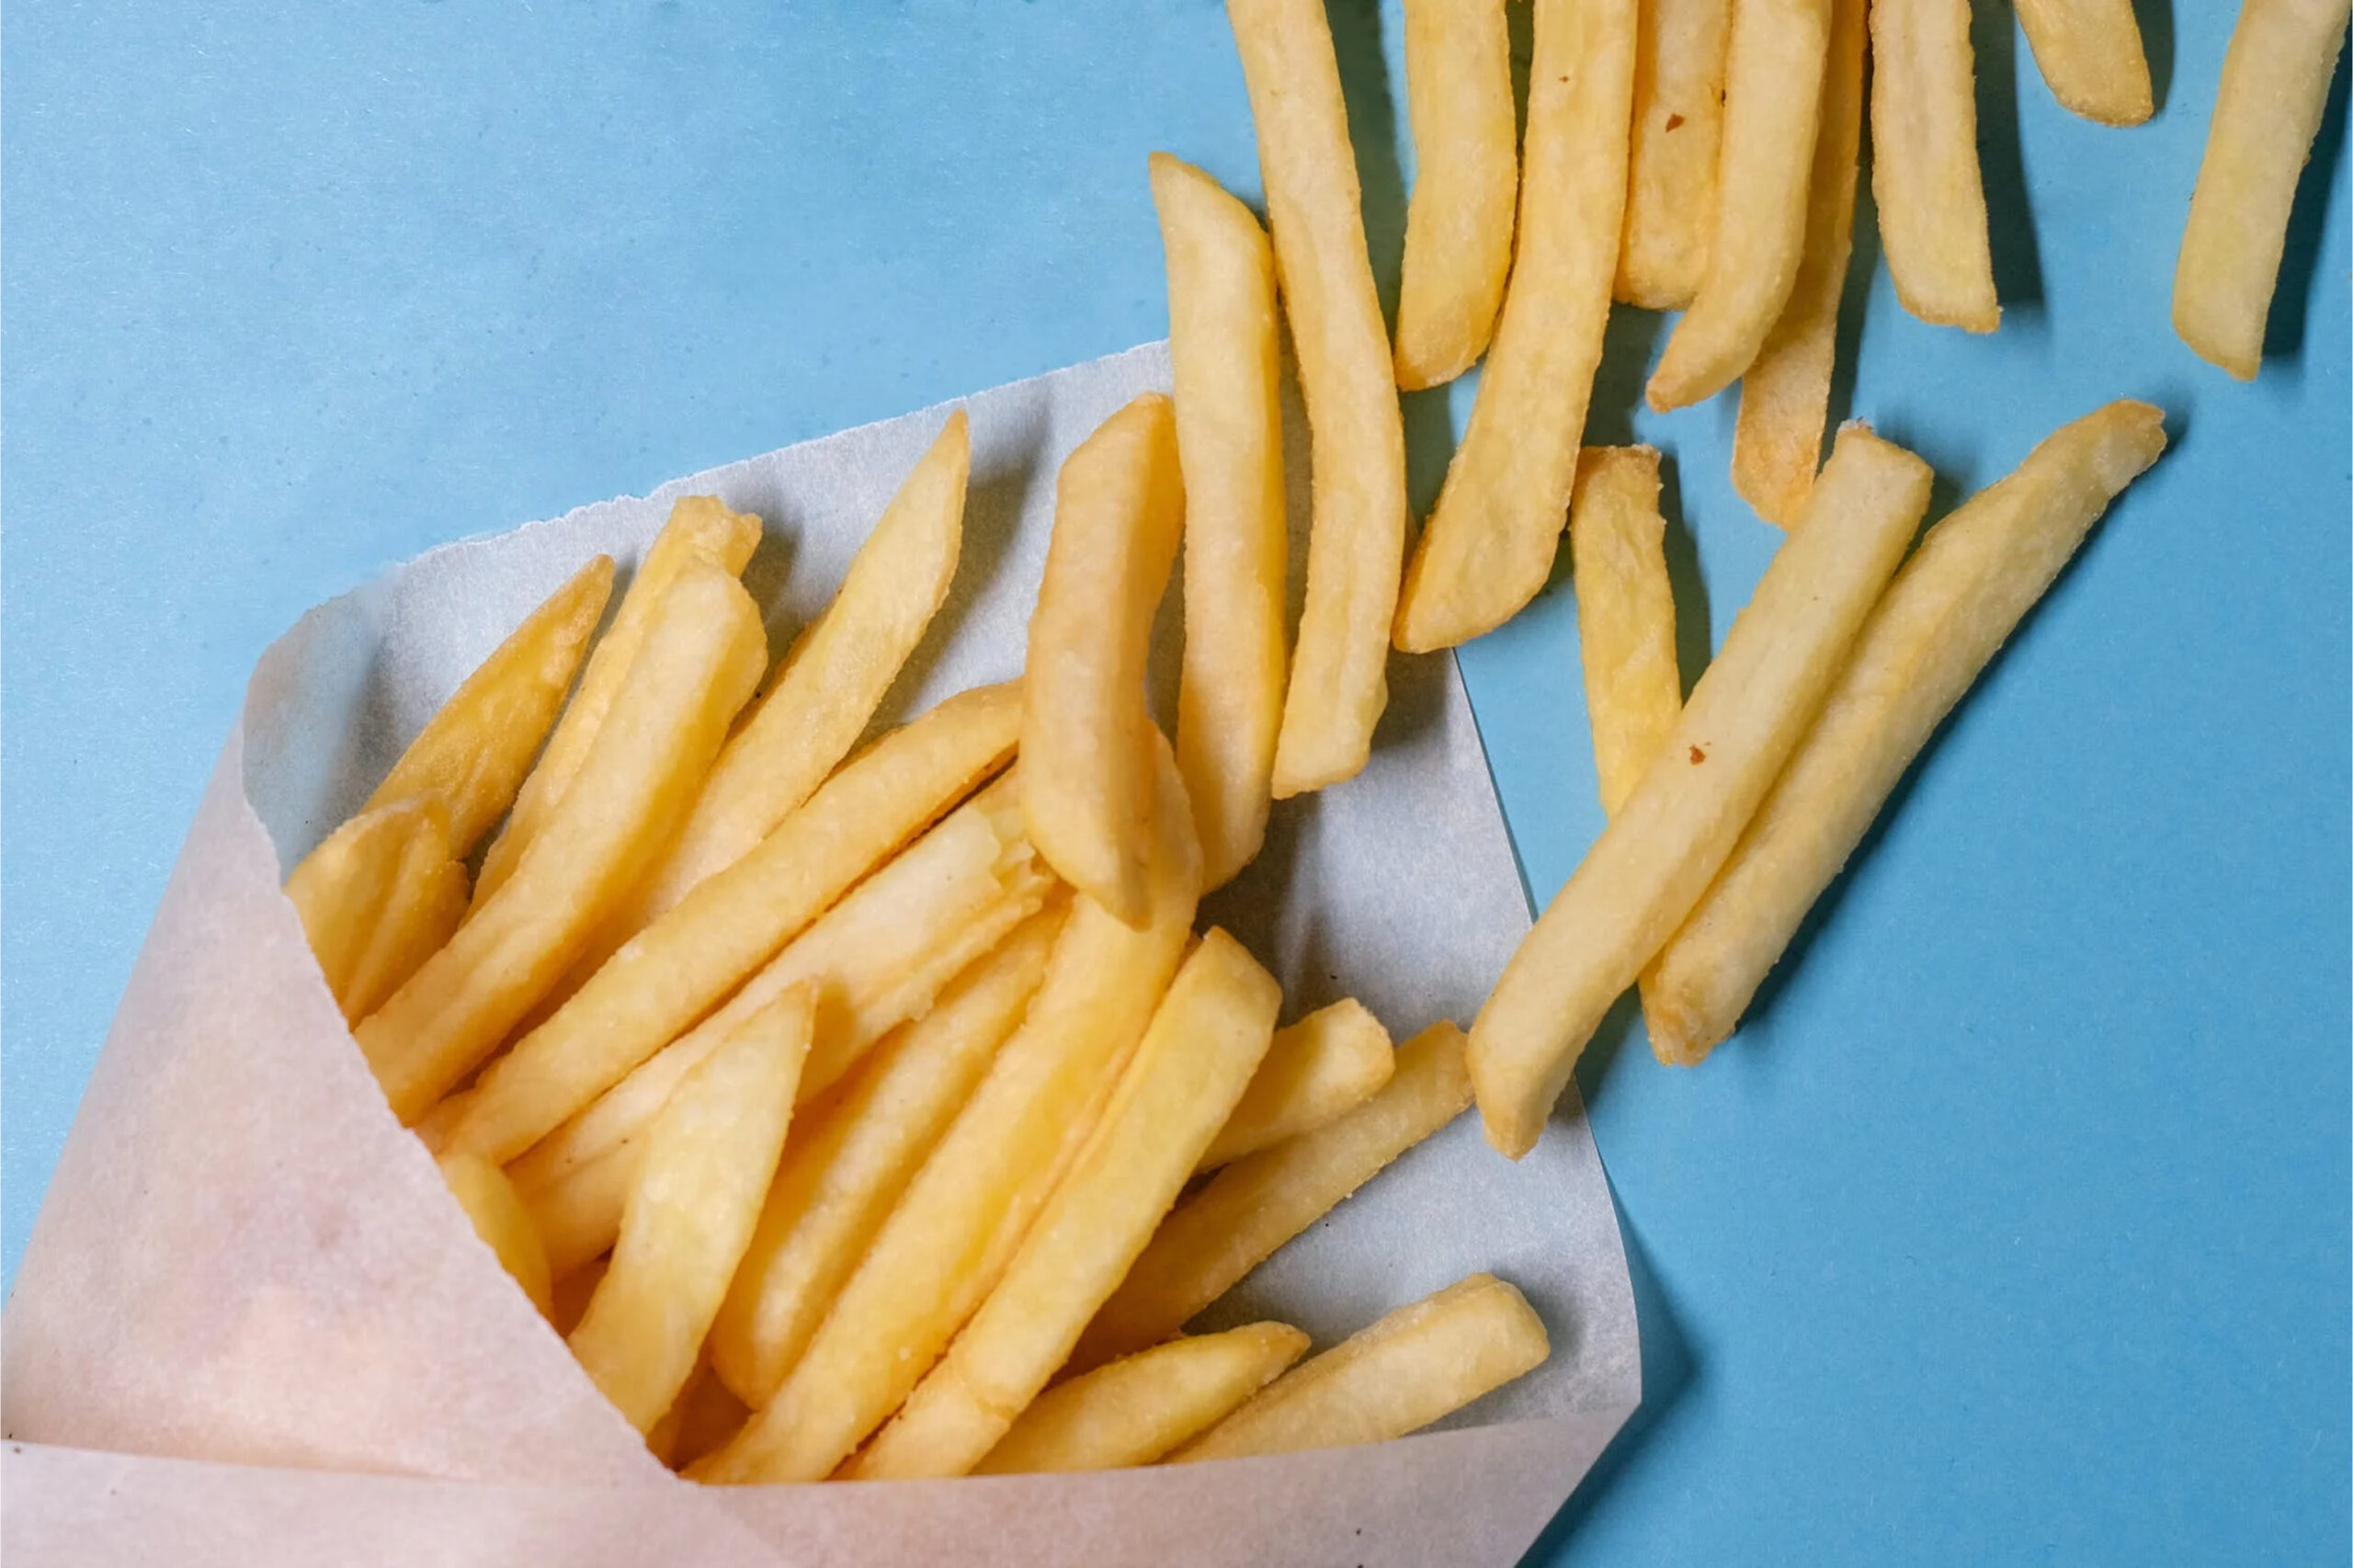 Forget Fast Food Advertising Lawsuit the Fries Are the Problem